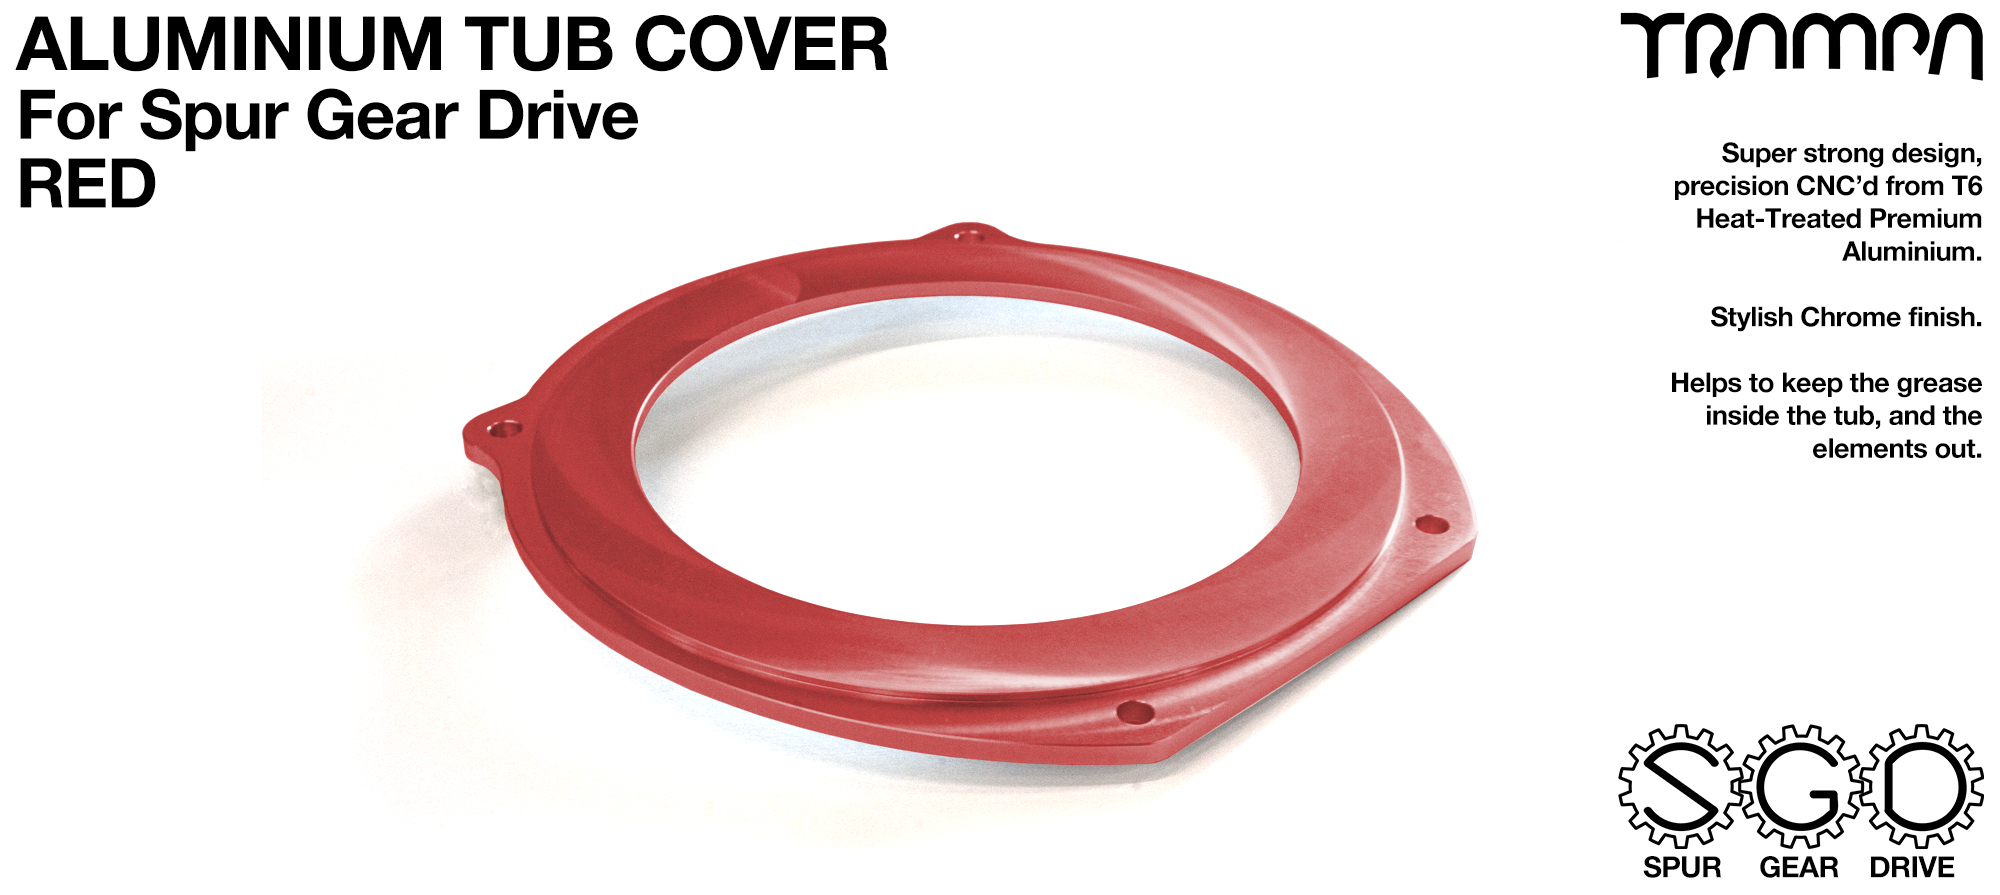  Spur Gear Drive Tub Cover - RED 